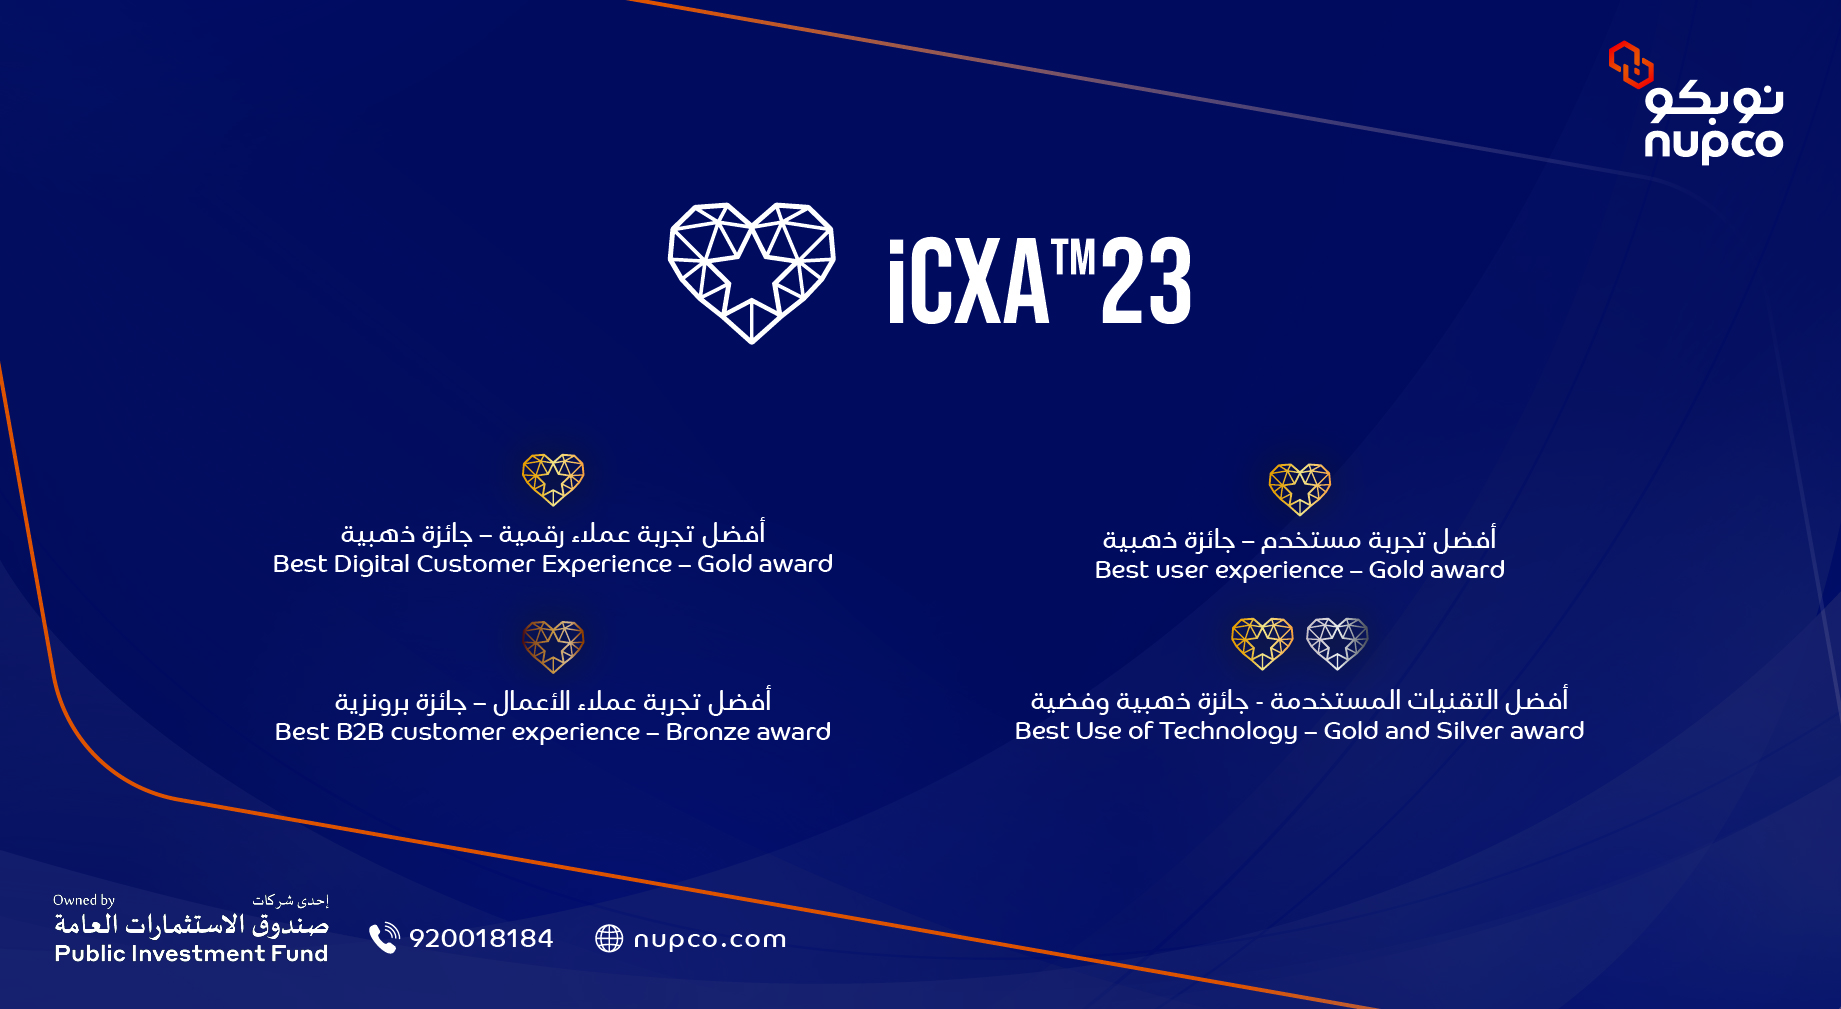 nupco tops the ICXA with five awards, including 3 gold